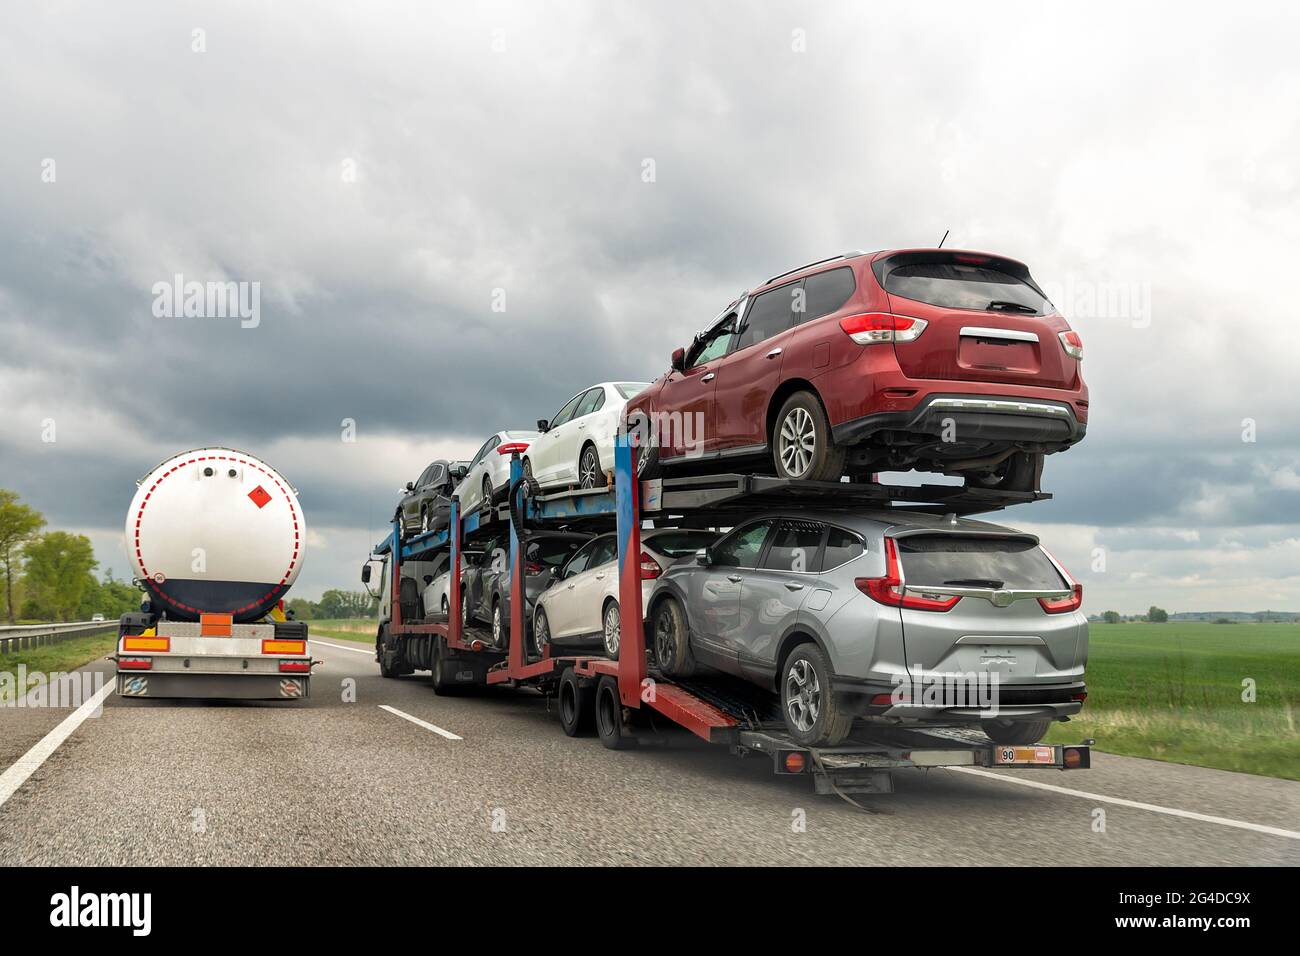 Tow truck car carrier semi trailer on highway carrying batch of damaged cars sold on insurance car auctions for repair and recovery. Vehicles shipment Stock Photo